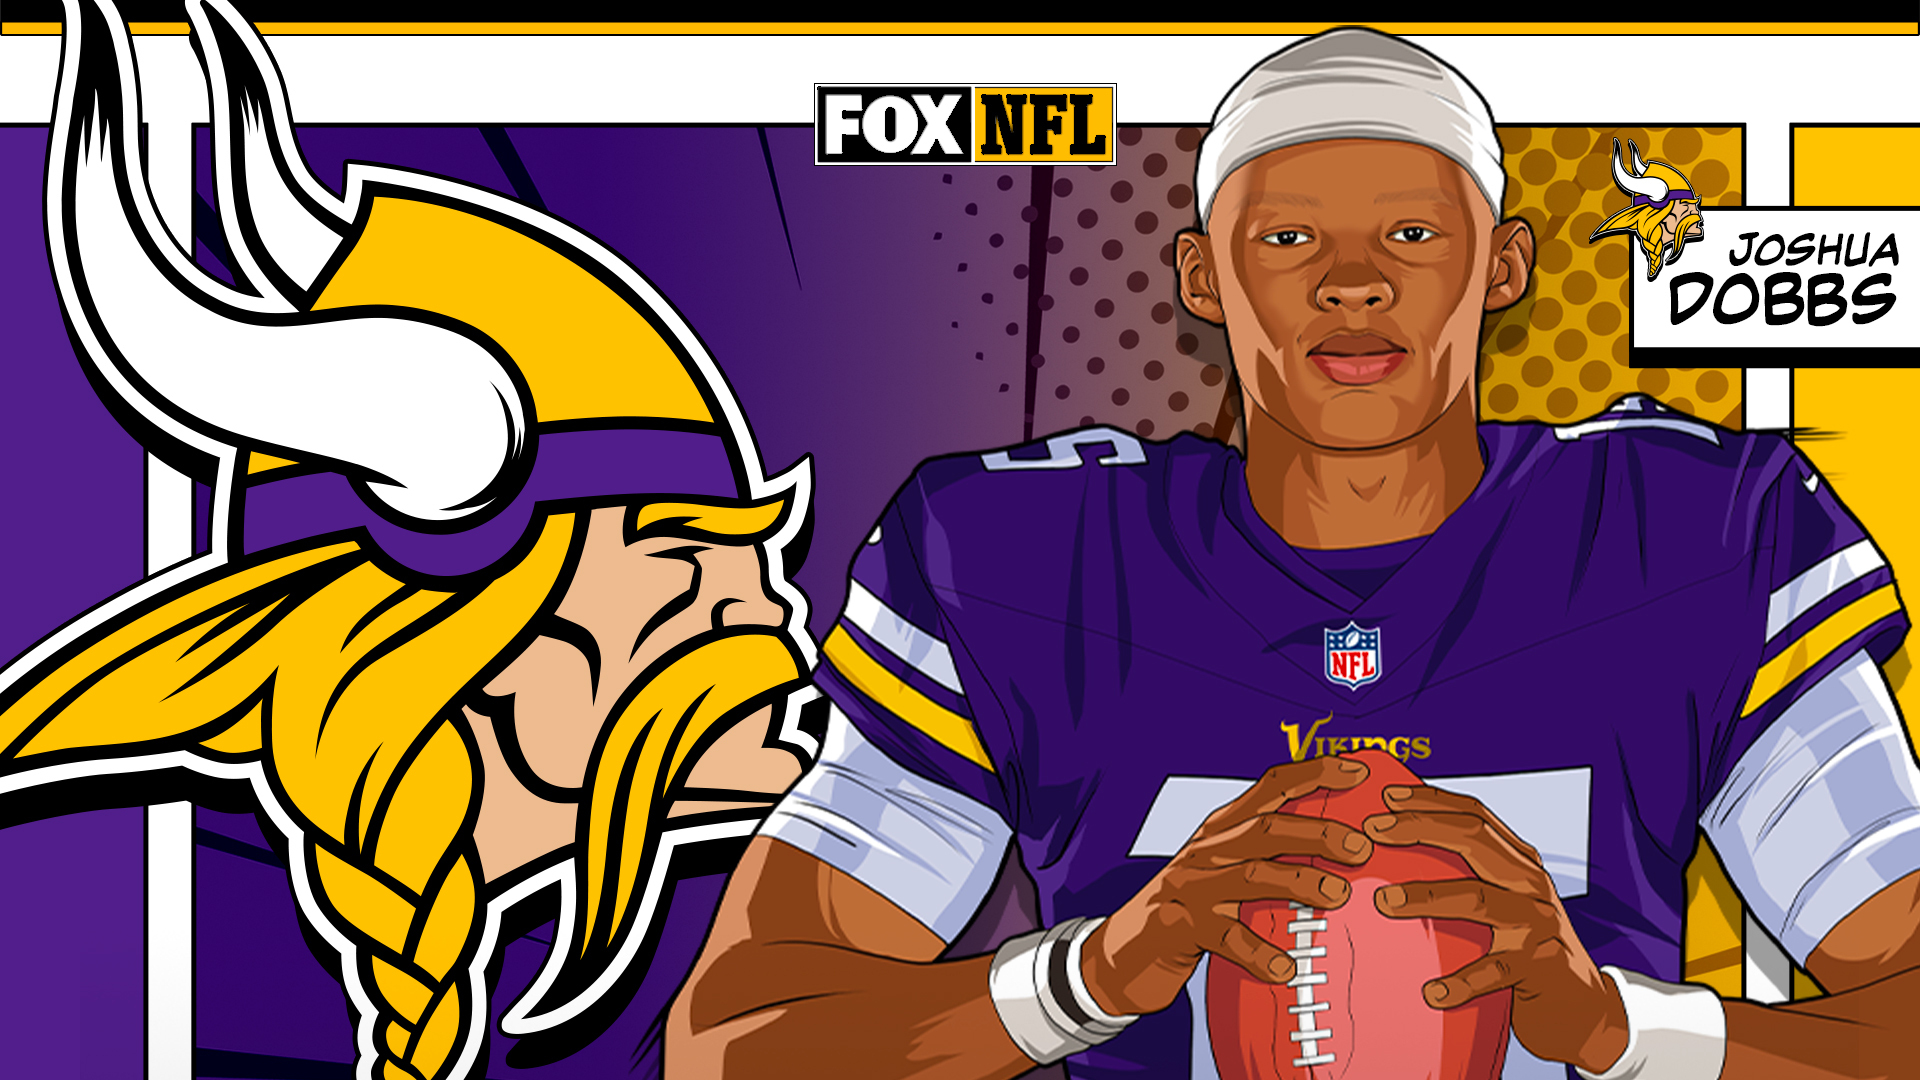 Josh Dobbs is one of the NFL's best stories. He and Vikings can be more than that